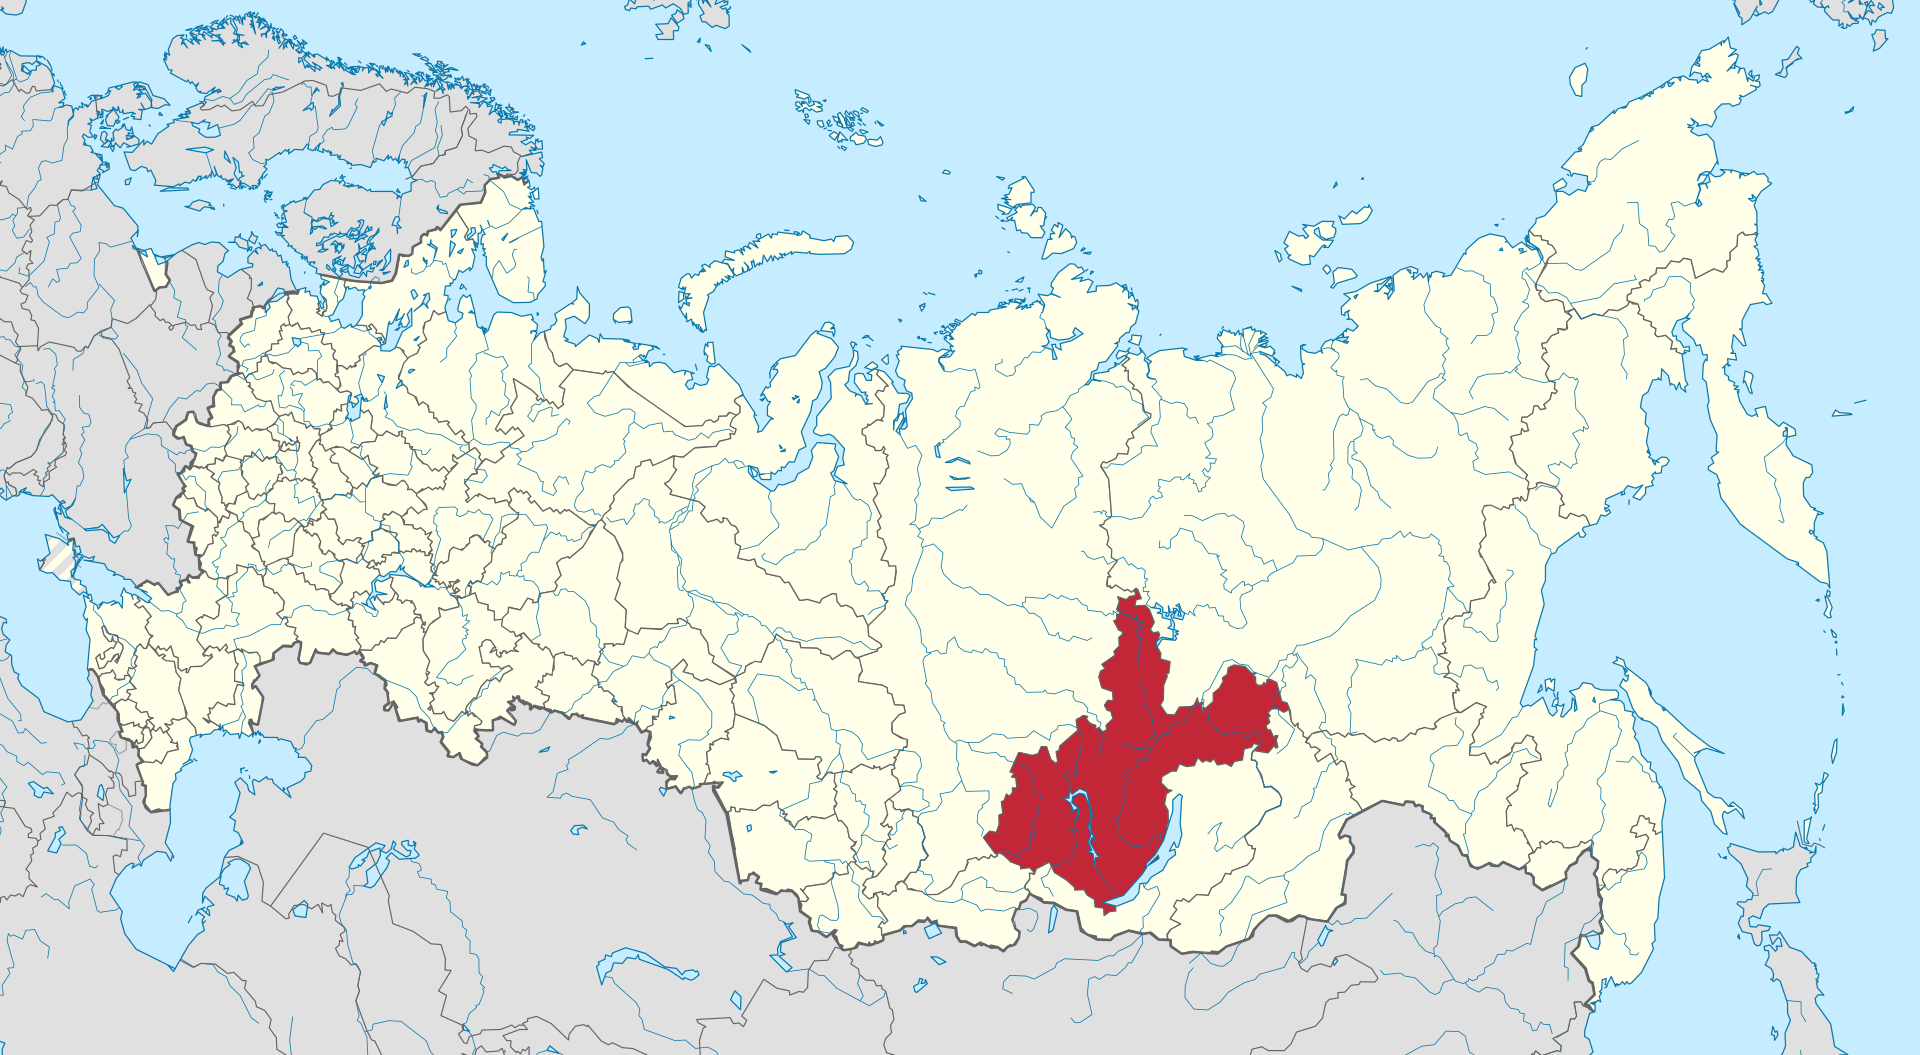 A map of Russia, with the Irkutsk Oblast shaded in red.